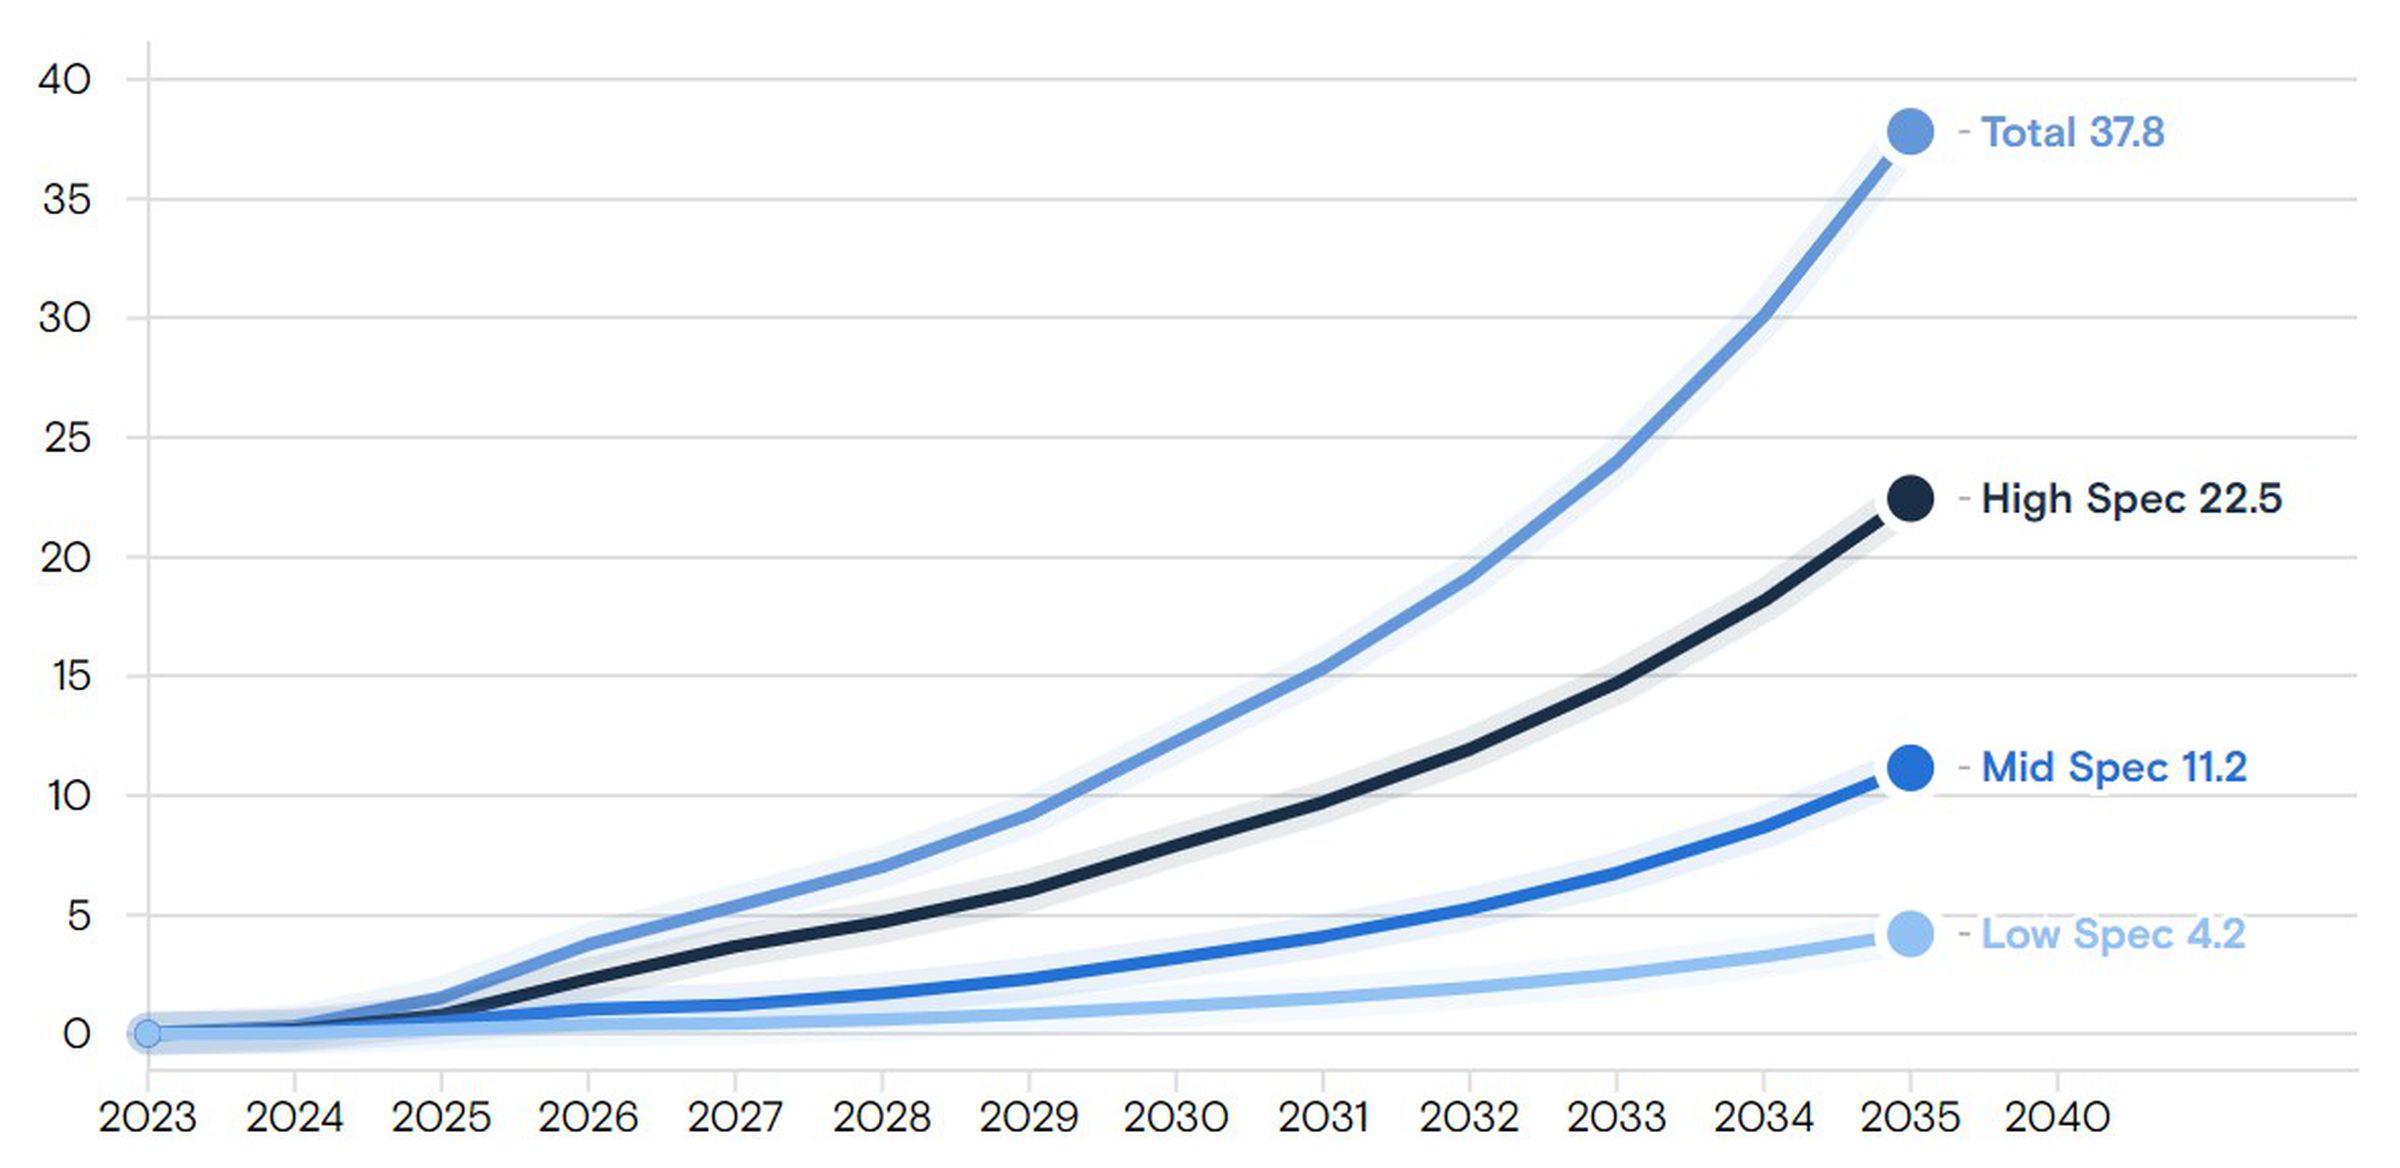 A graph showing the forecast global humanoid robot market size&nbsp;in billions.